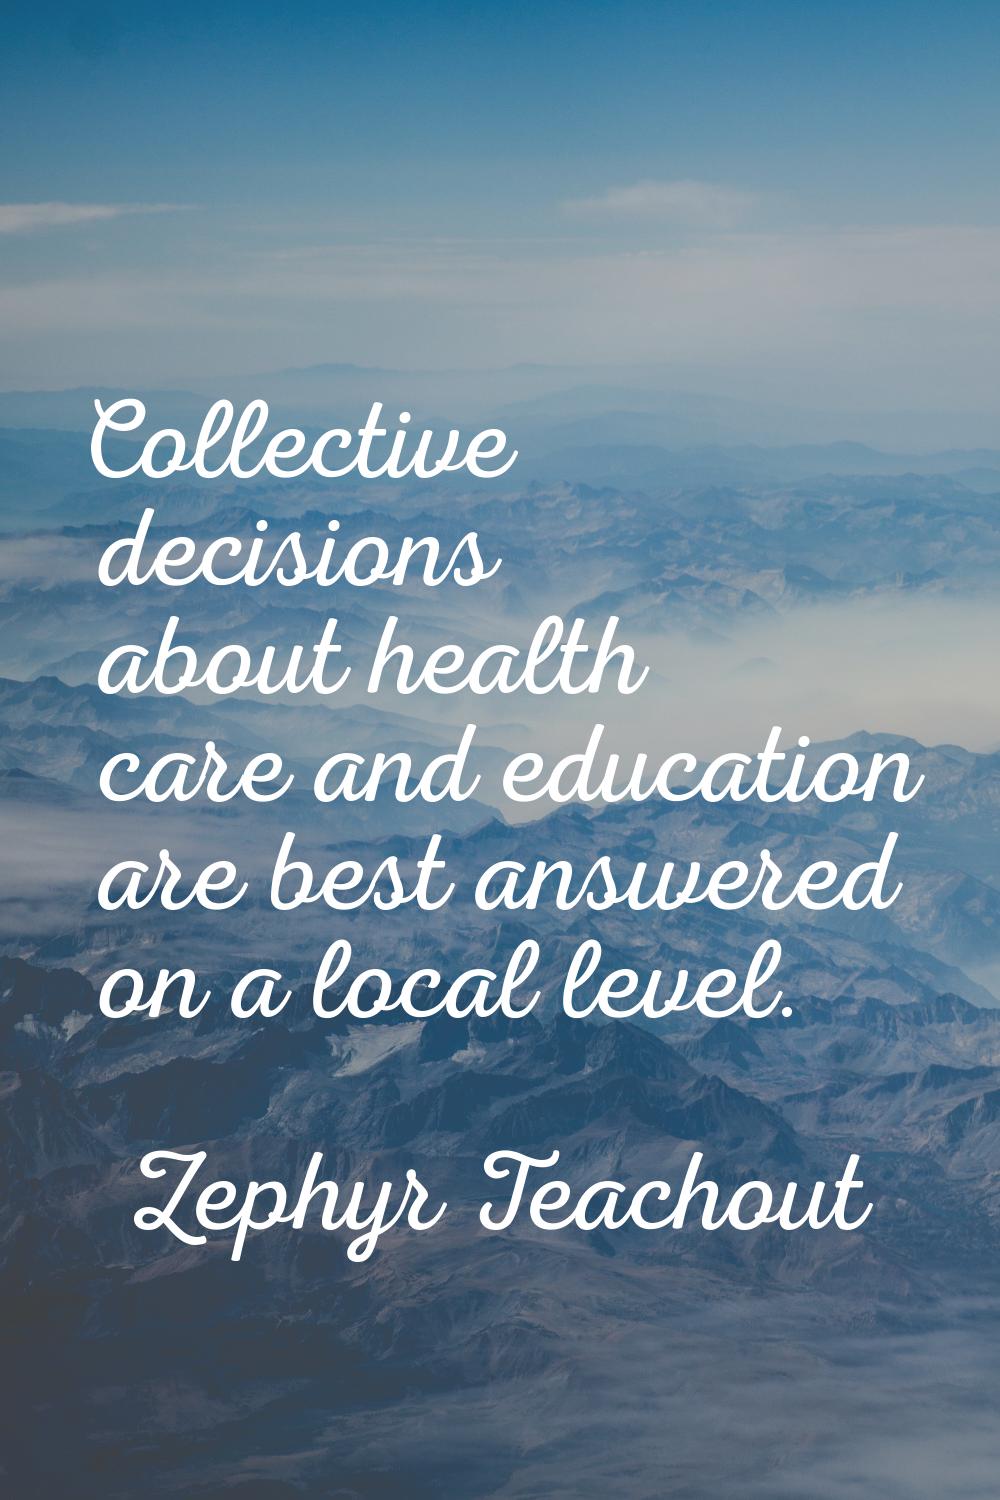 Collective decisions about health care and education are best answered on a local level.